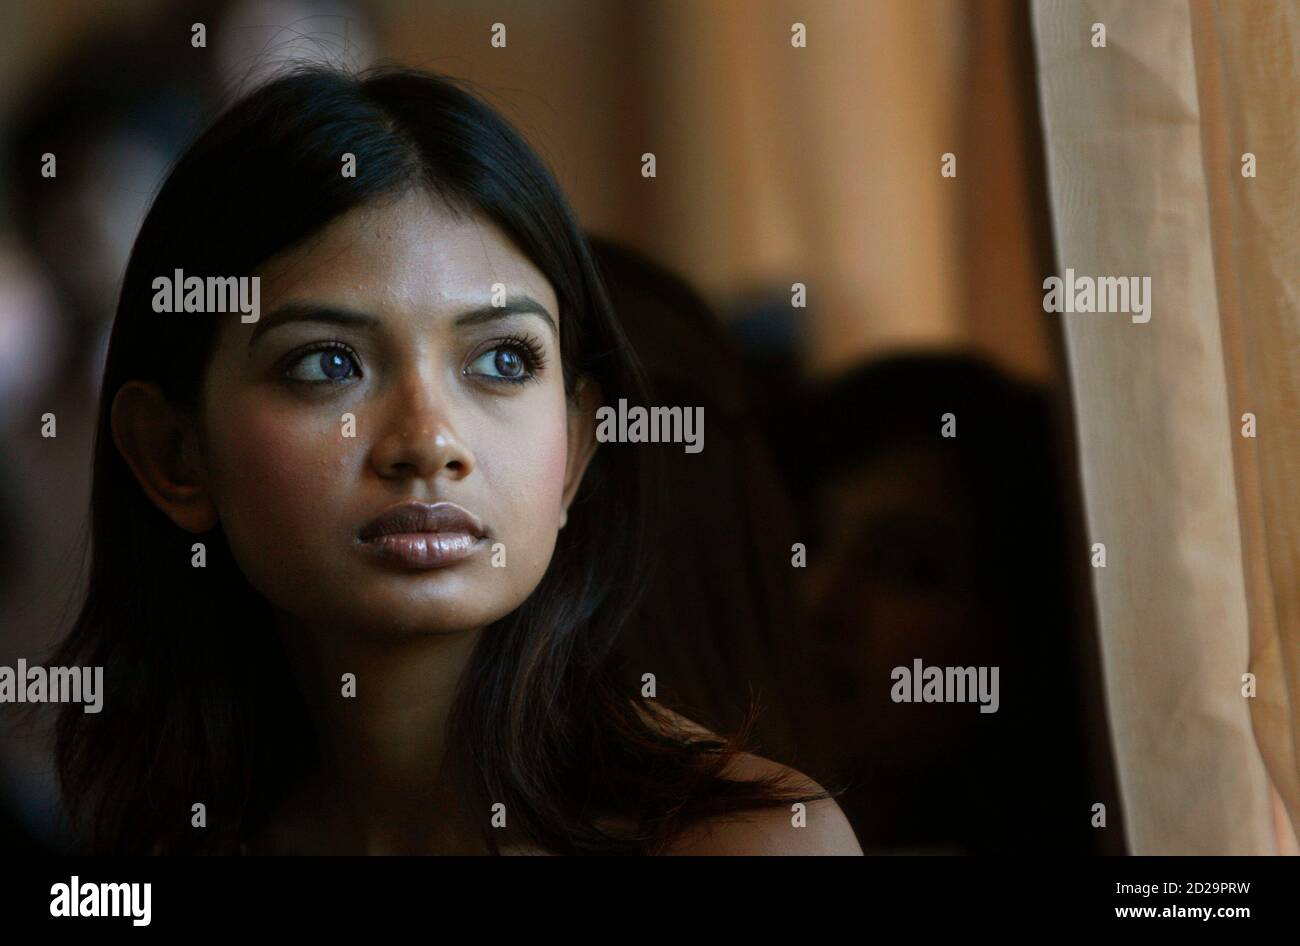 An aspiring model waits for her turn to be judged during an audition for  fashion models in New Delhi September 3, 2008. REUTERS/Adnan Abidi (INDIA  Stock Photo - Alamy